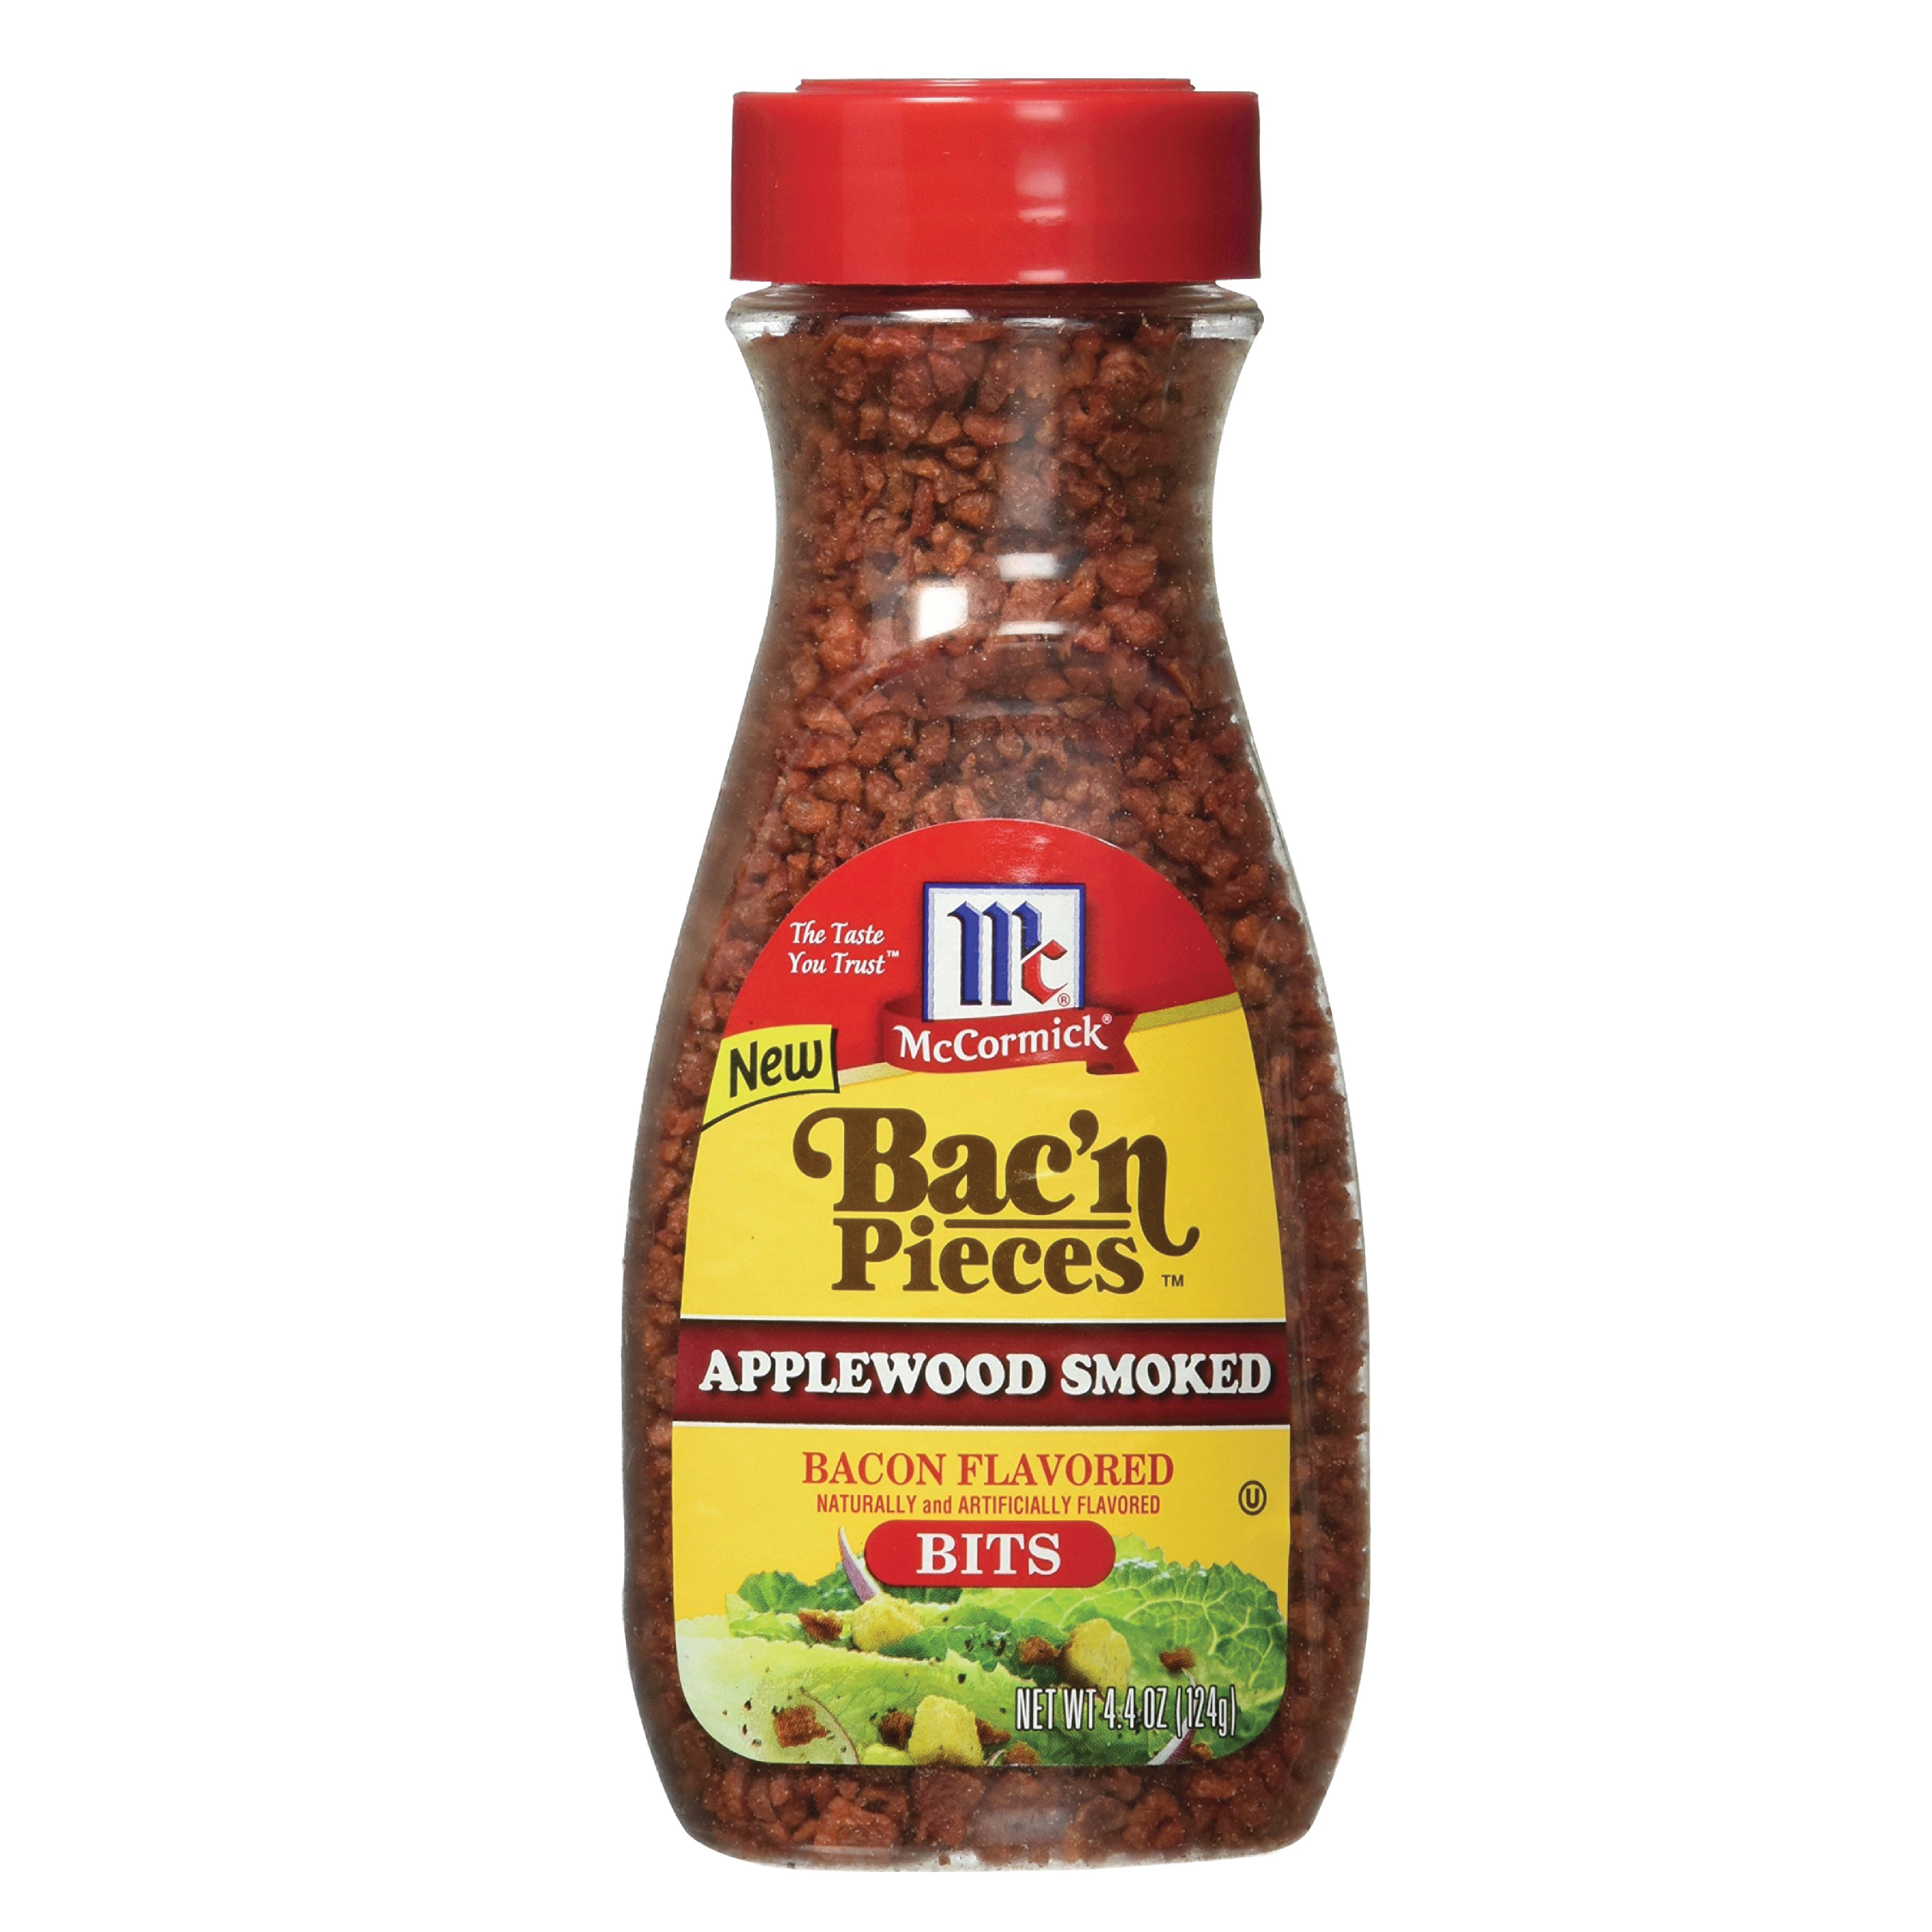 McCormick Bac'n Pieces Applewood Smoked Bacon Flavored Bits Topping 4.4oz